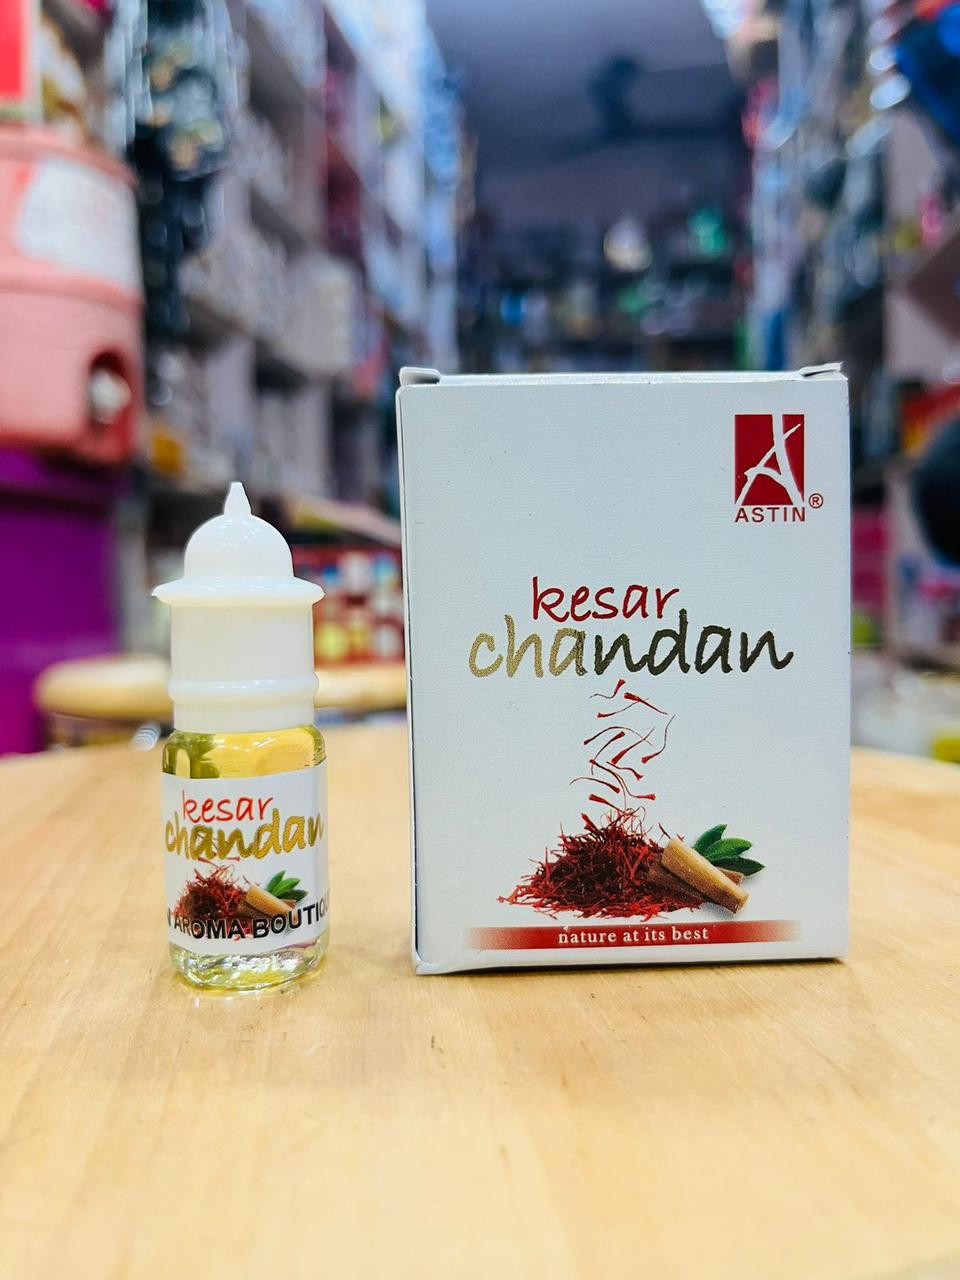 ASTIN Keasr chandan nature at its best alcohol -free perfume with attar